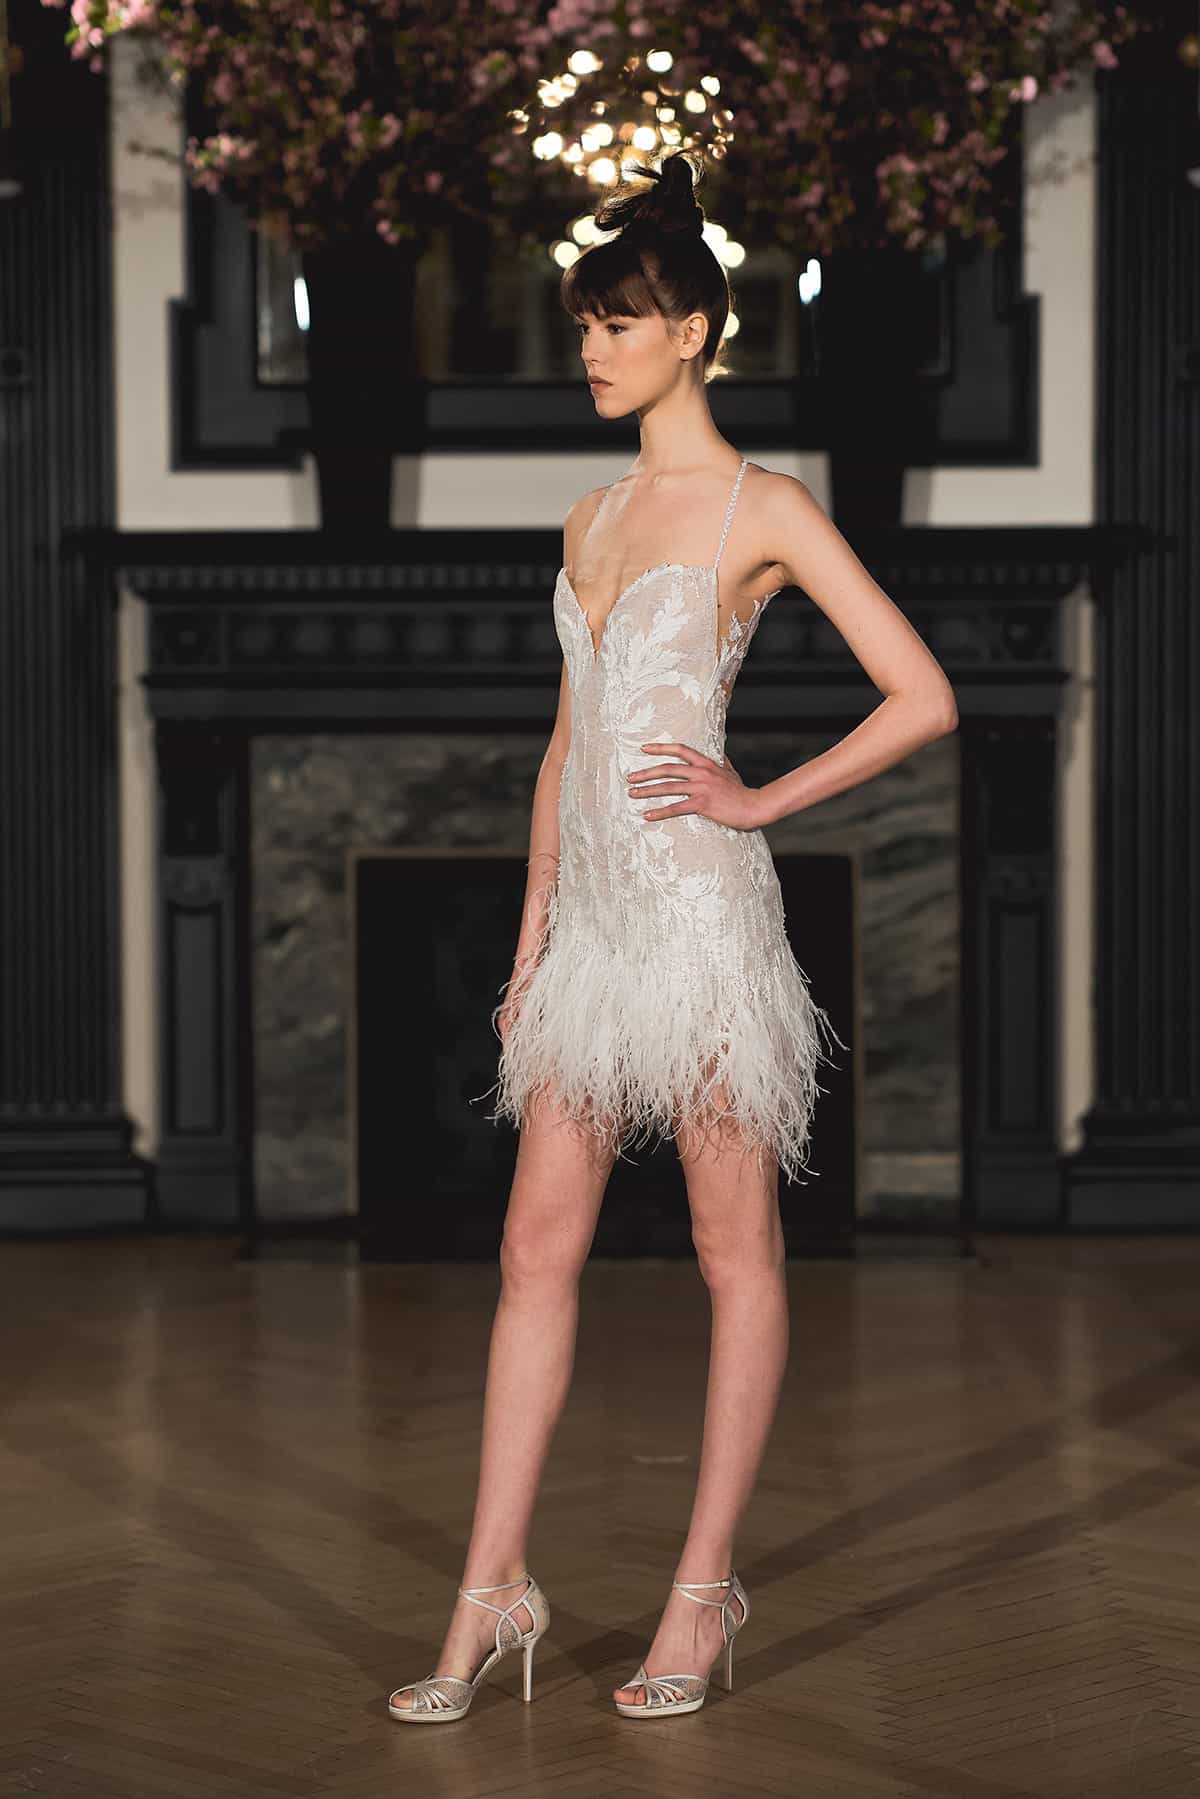 Ines-Di-Santo-Spring-2019-collection